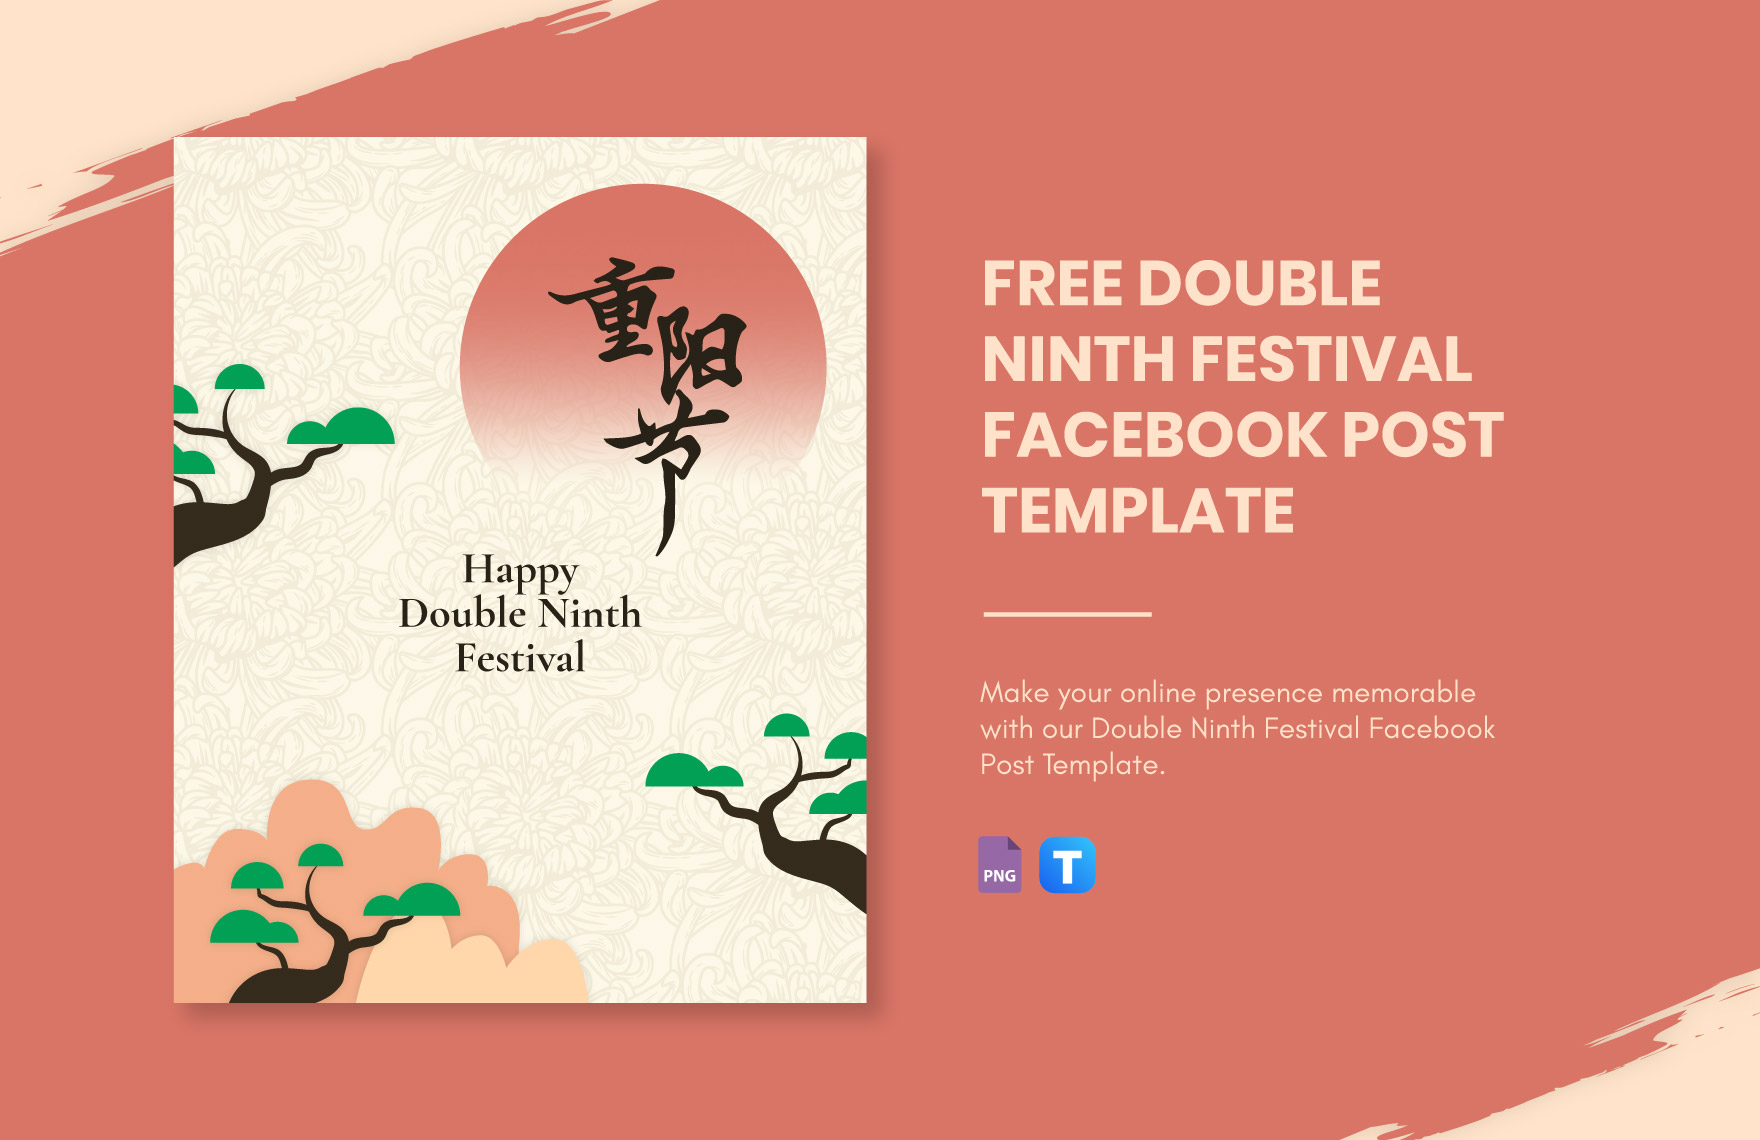 Free Double Ninth Festival Facebook Post Template in PNG